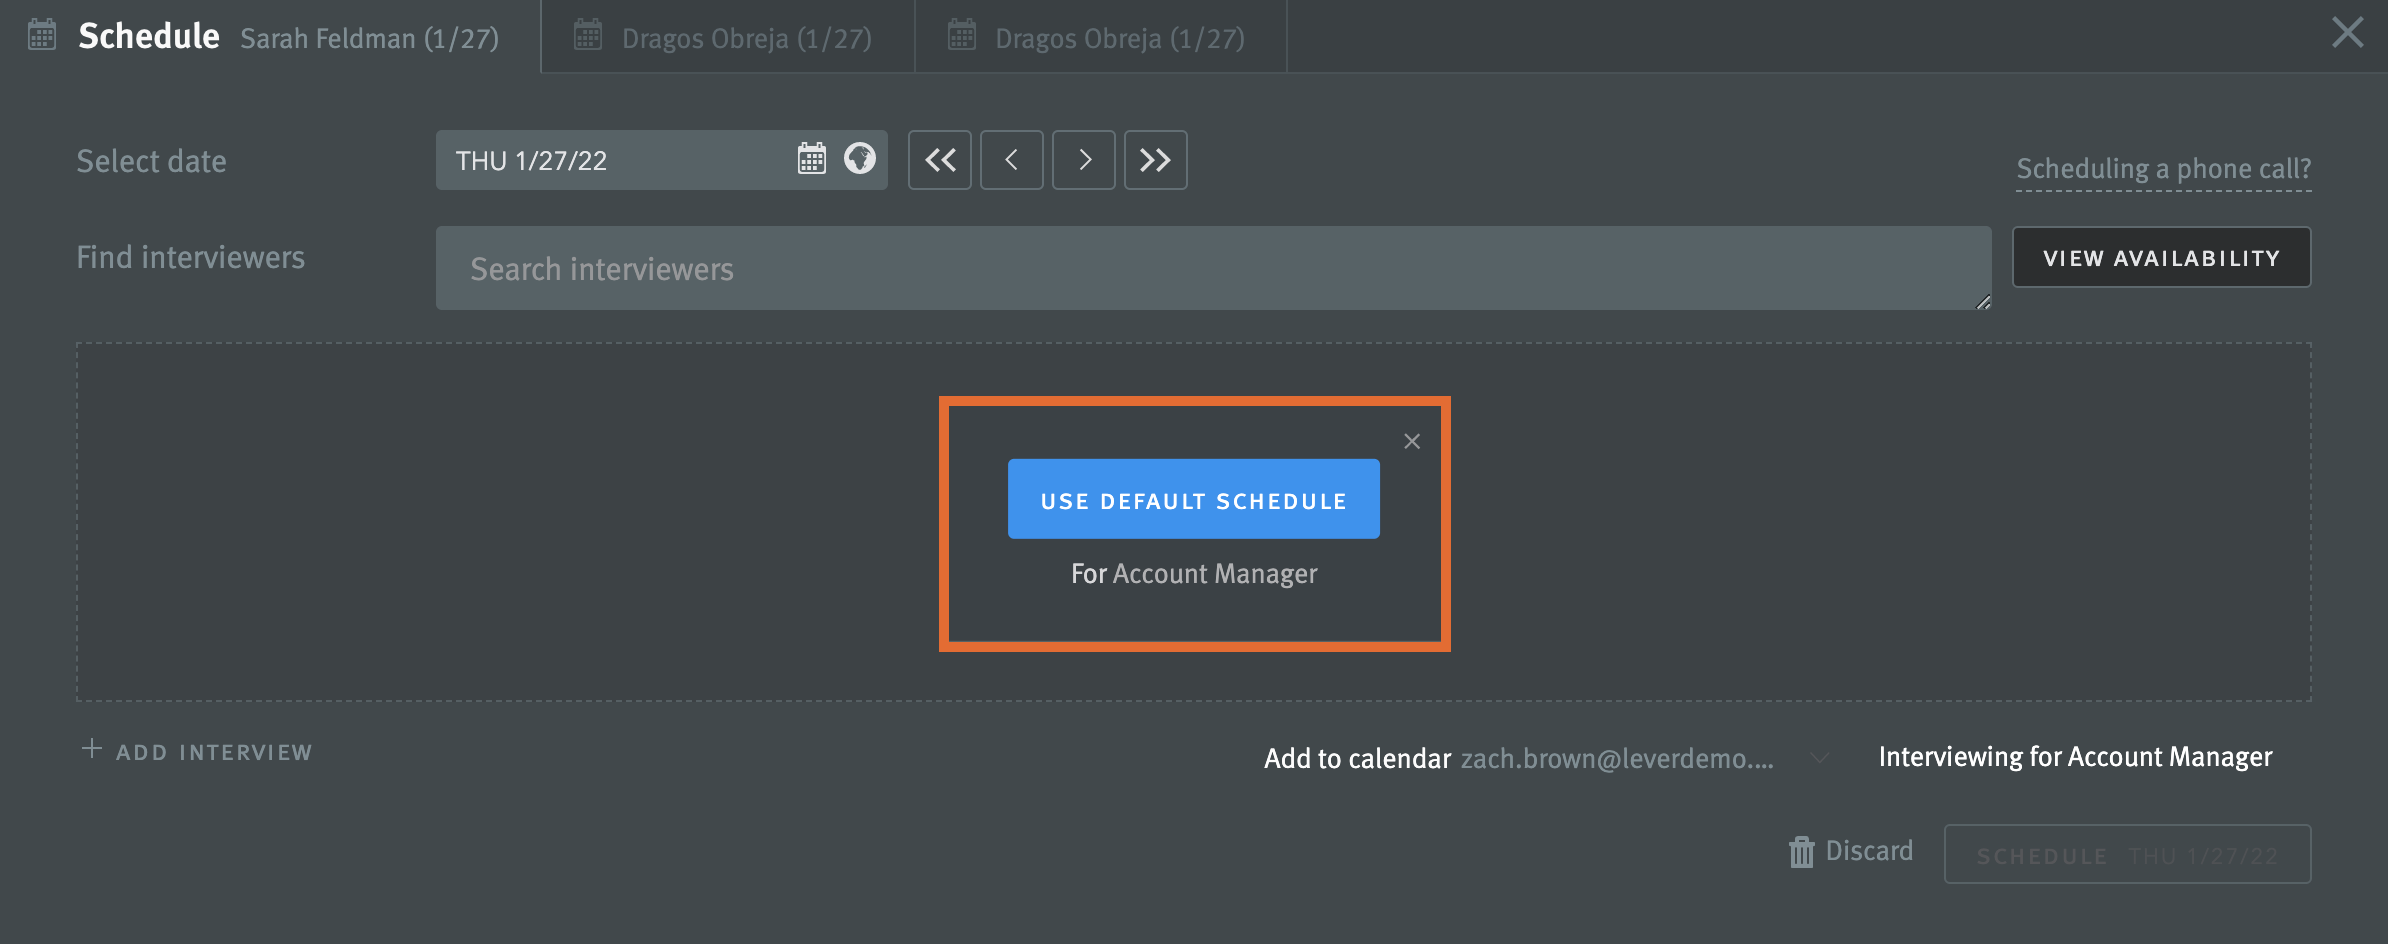 Scheduler with use default scheduler outlined